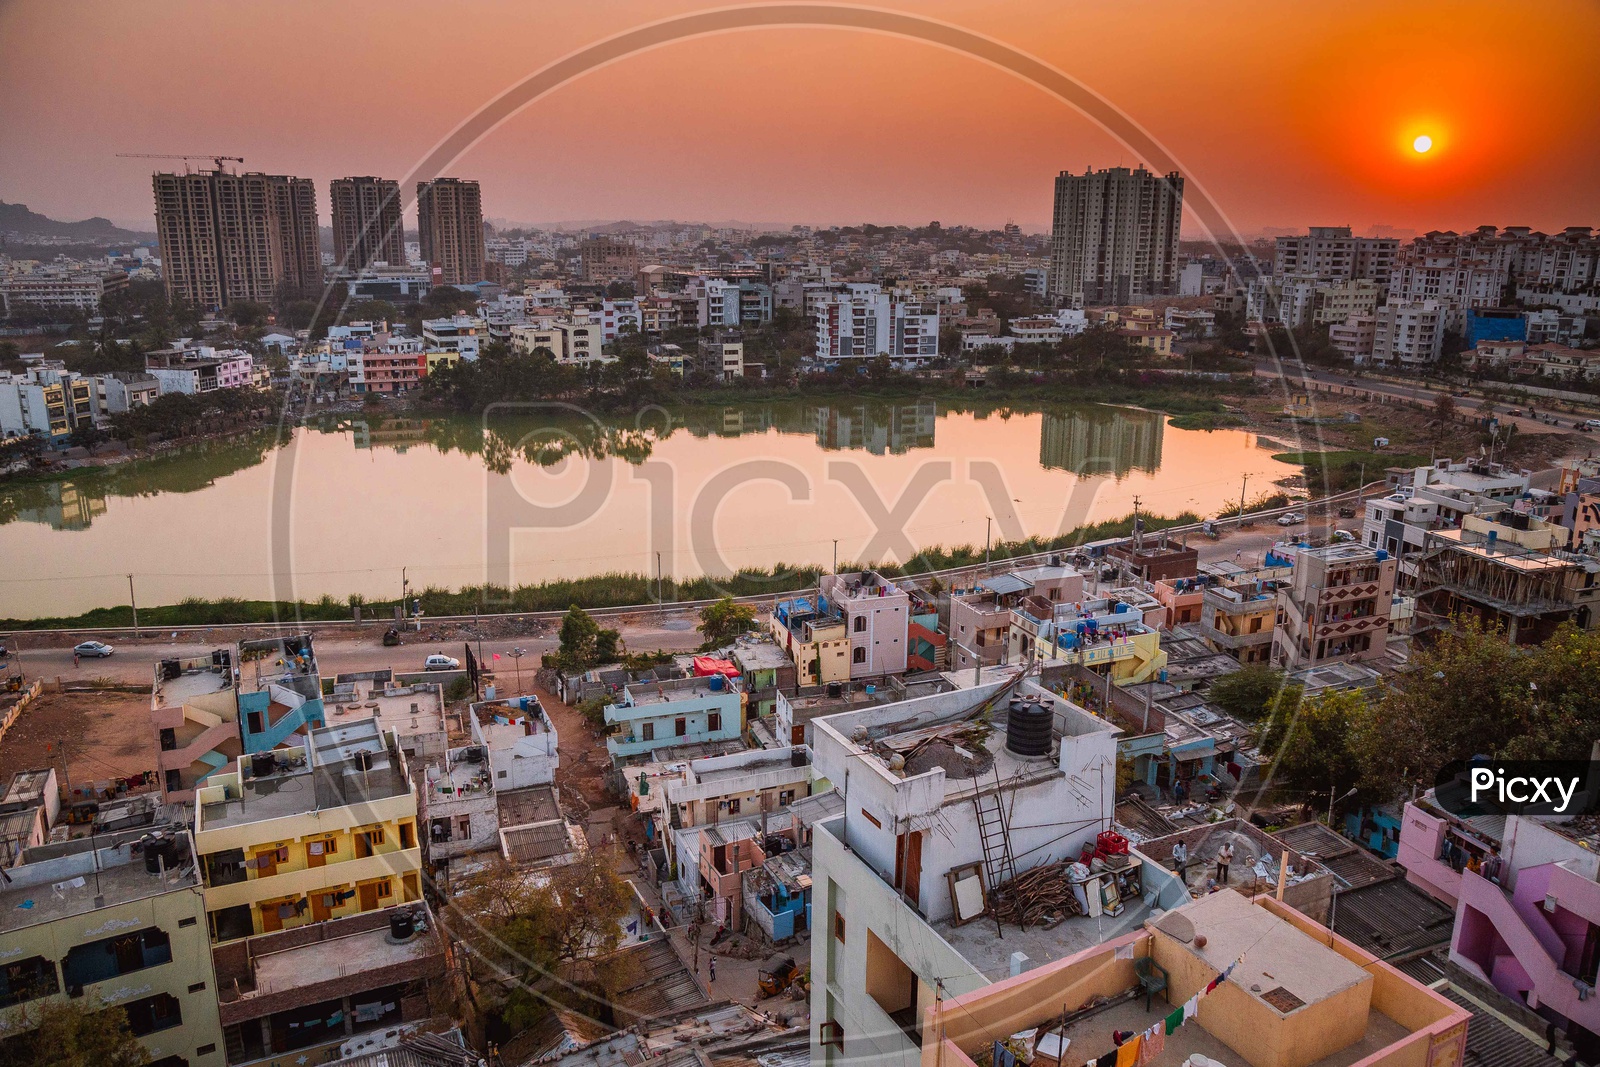 Sunset Over a City Scape View with Buildings and lake